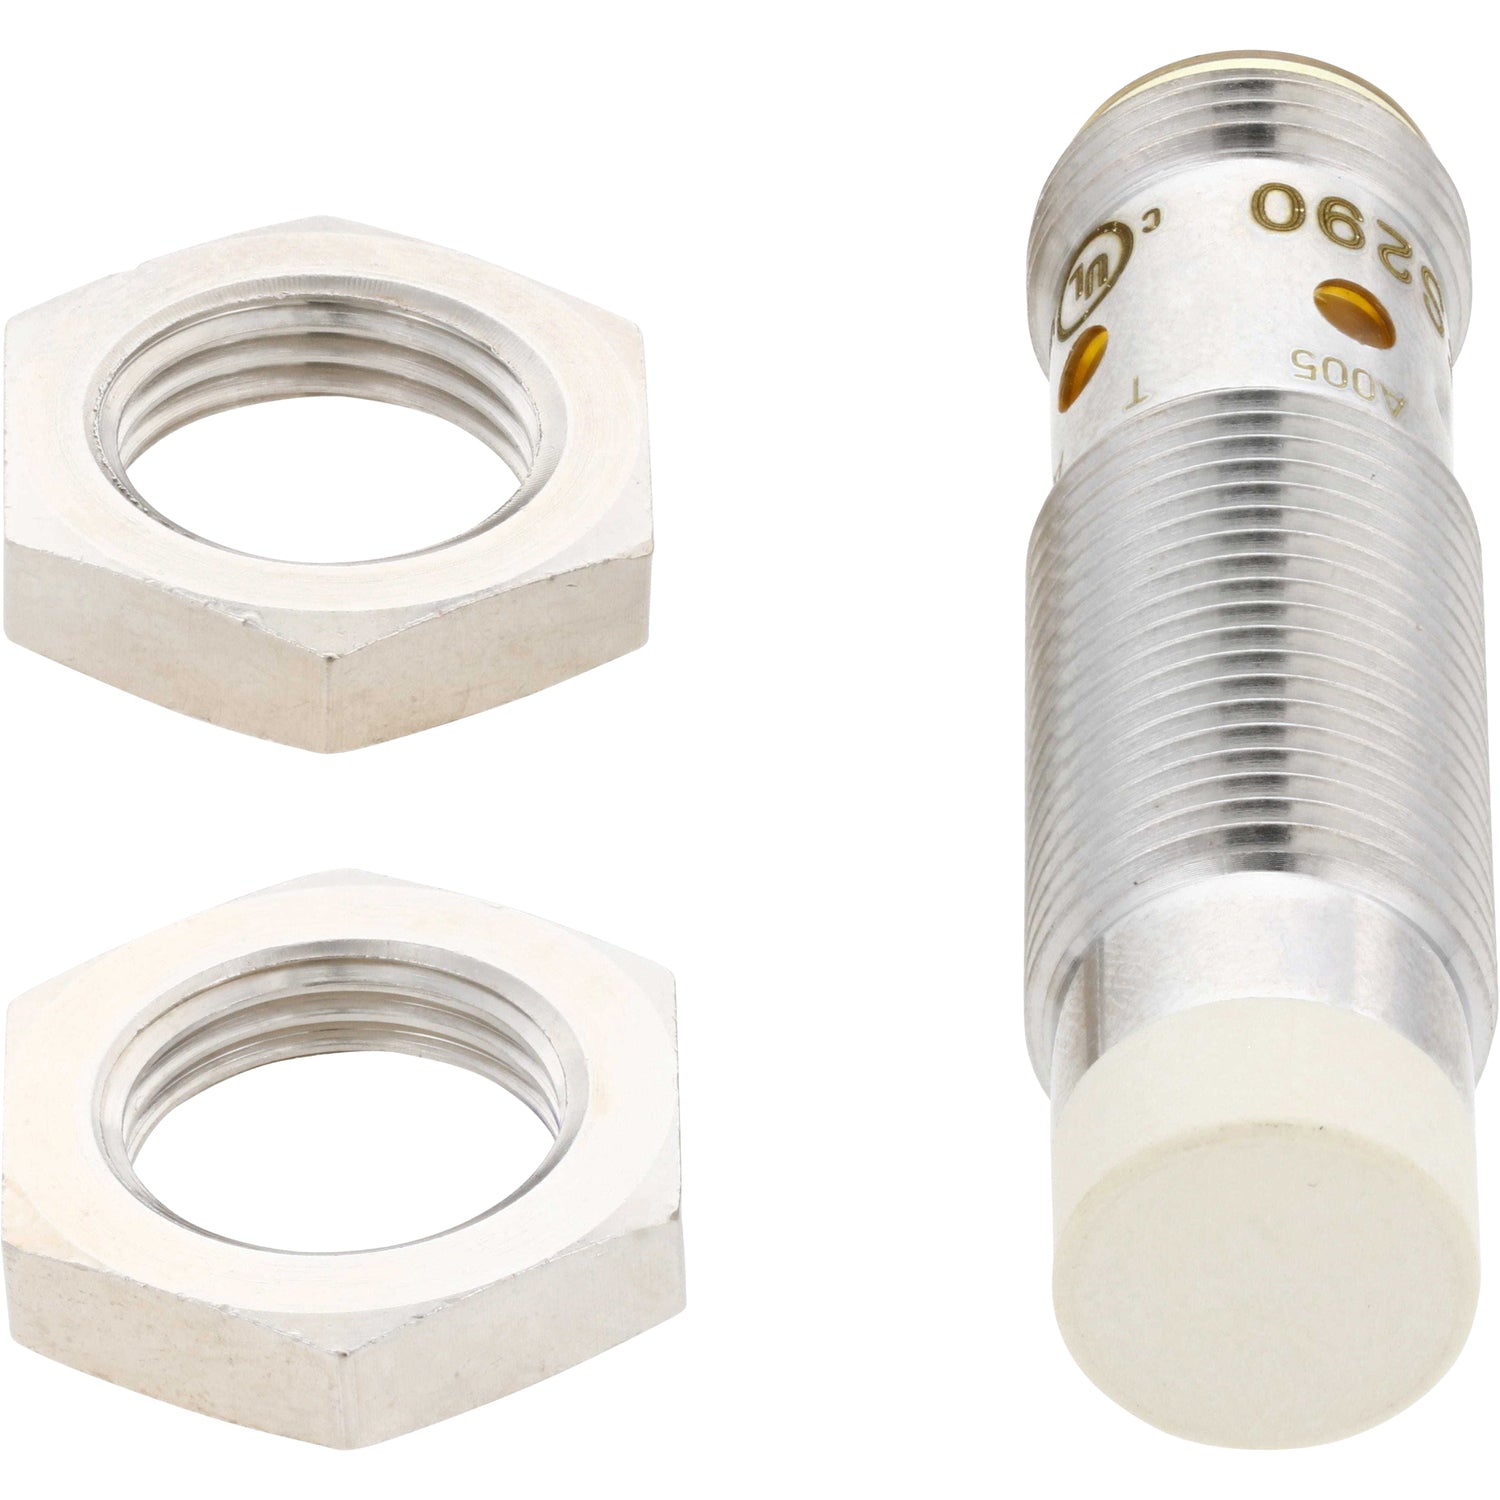 Threaded inductive sensor with white tipped cap and two stainless steel hex nuts on white background. IFS290